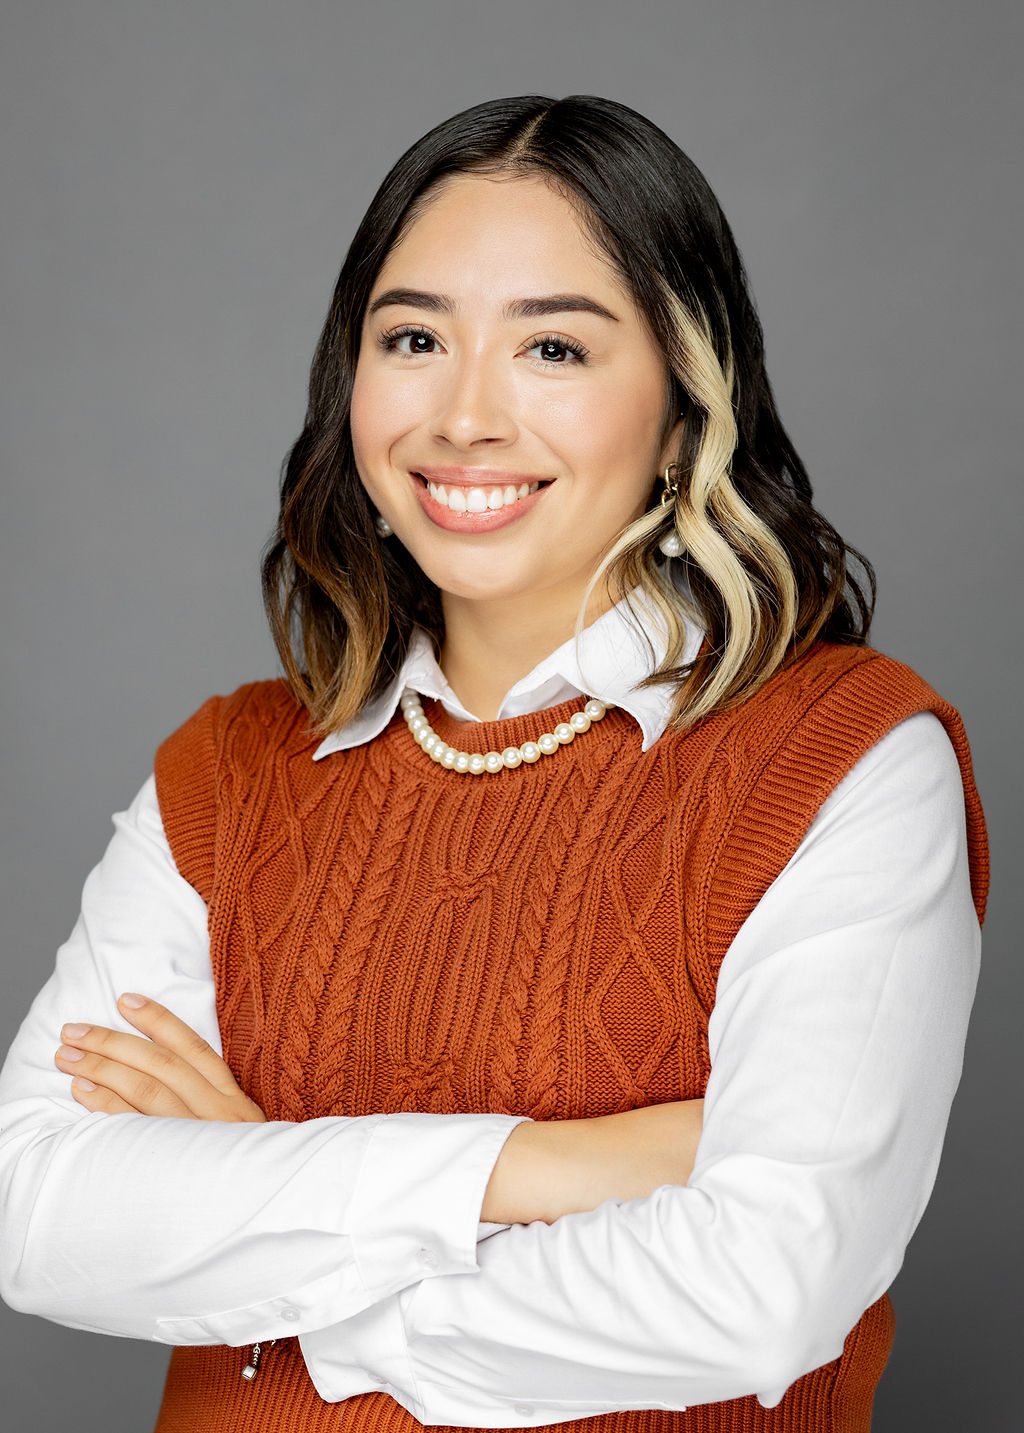 This photo is a professional headshot of Marlene Rios. She is a Latine woman with medium-length wavy dark brown hair with a few locks of blonde in the front. She is wearing a white long-sleeved button-up with a burnt orange sweater vest over it. She is also wearing a string of pearls around her neck and gold dangling earrings with big pearls at the end. She is smiling and crossing her arms confidently.